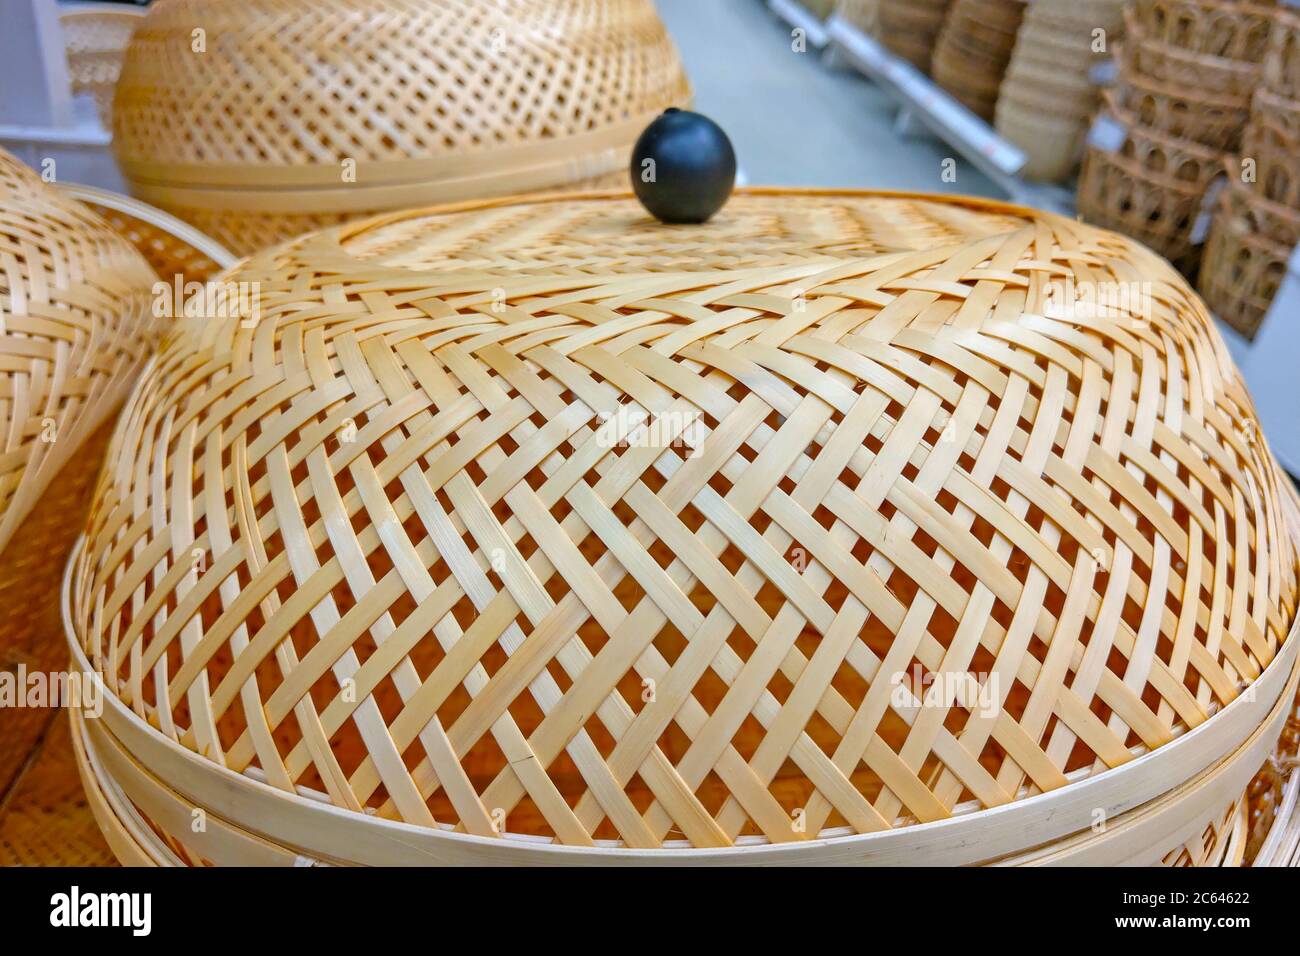 https://c8.alamy.com/comp/2C64622/wicker-boxes-for-storing-things-in-the-house-2C64622.jpg